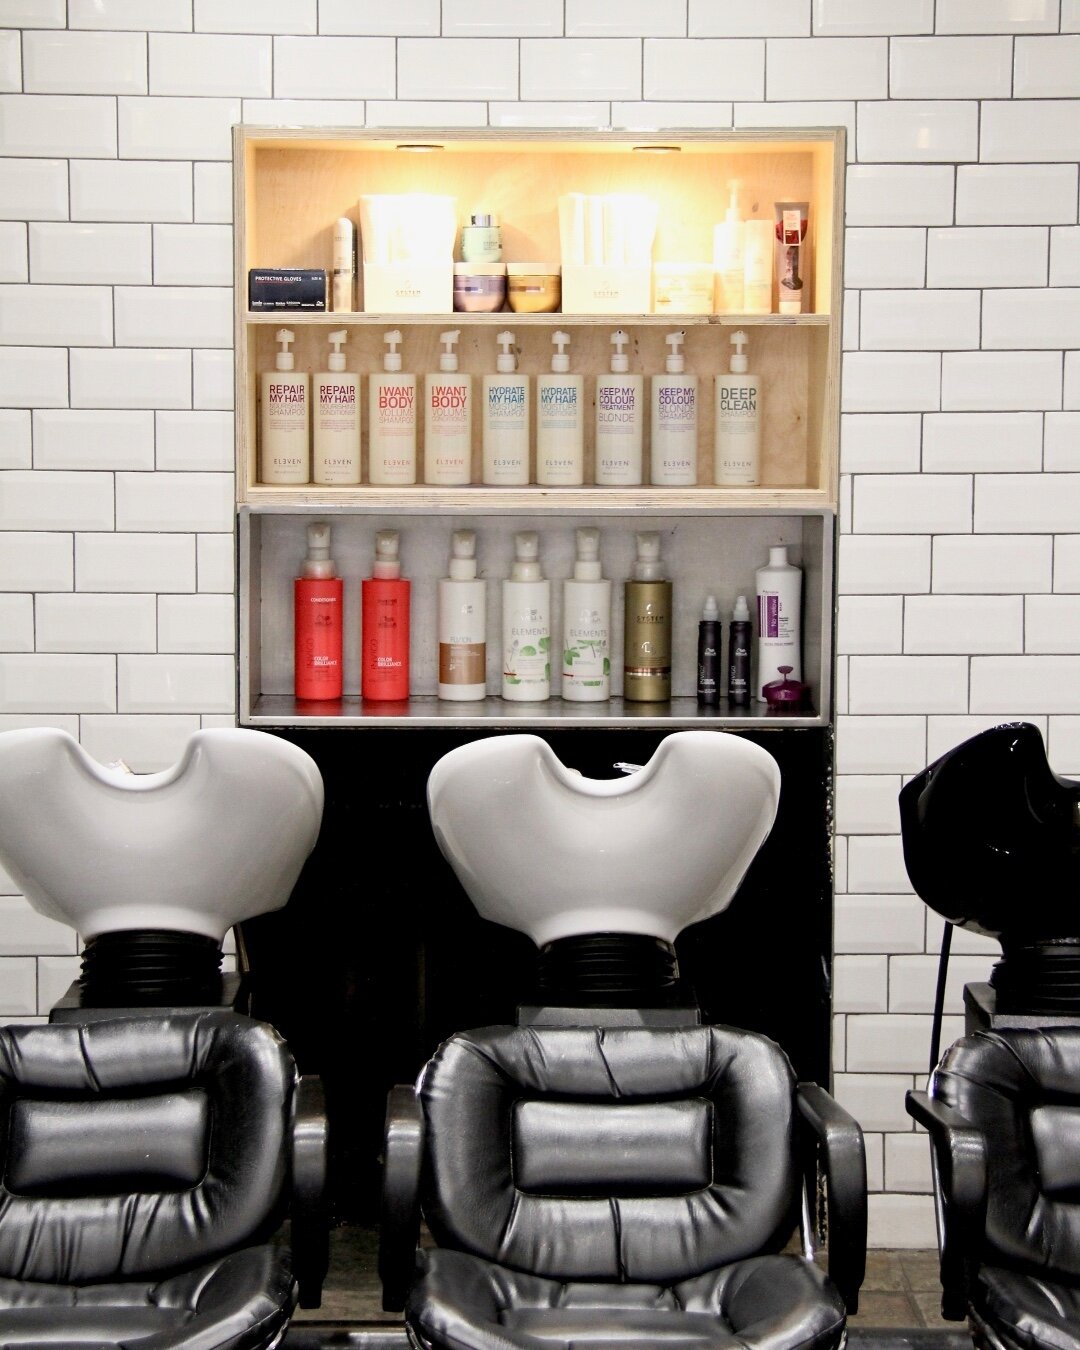 Where ideas become reality - our happy place 😍
.
.
.
#medusa #medusahairdressing #hairdresser #hair #hairlove #hairstyle #hairstyling #edinburgh #edinburghhairdresser